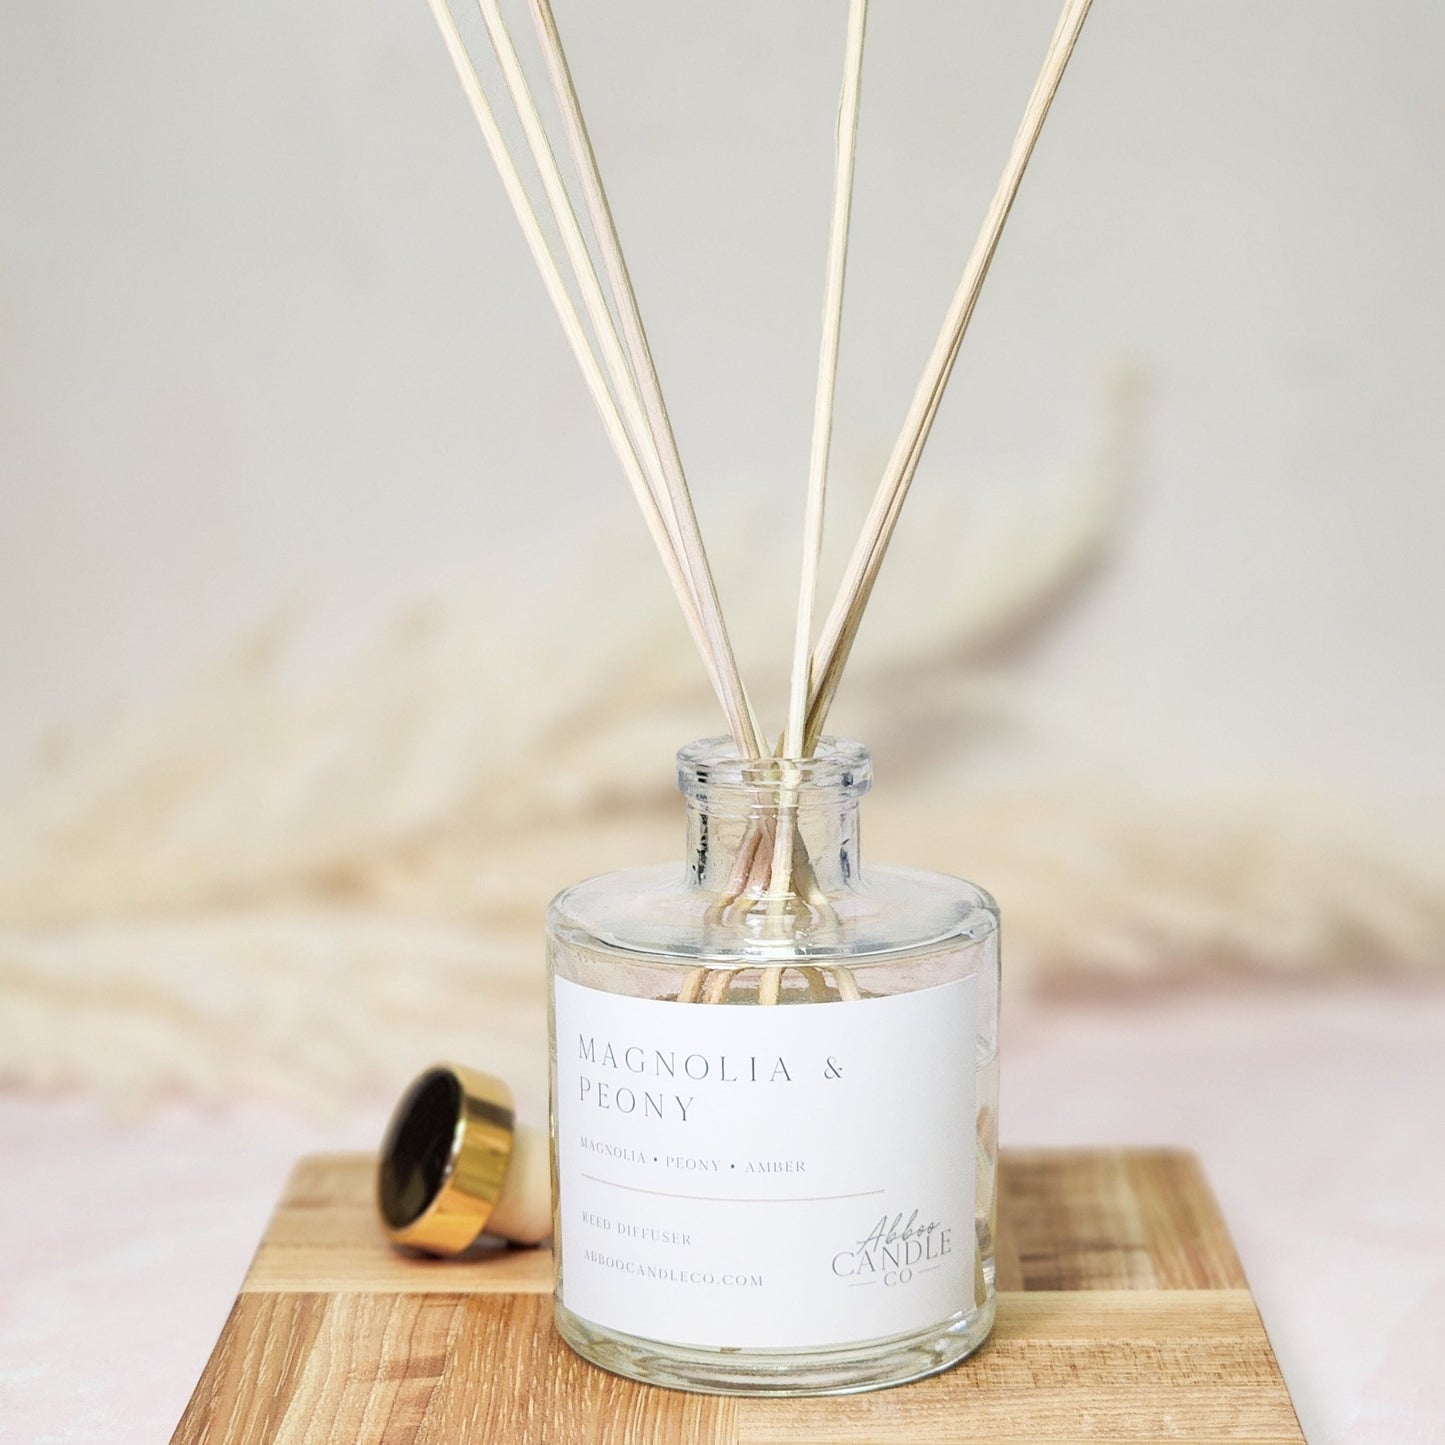 Magnolia and Peony Reed Diffuser - Abboo Candle Co